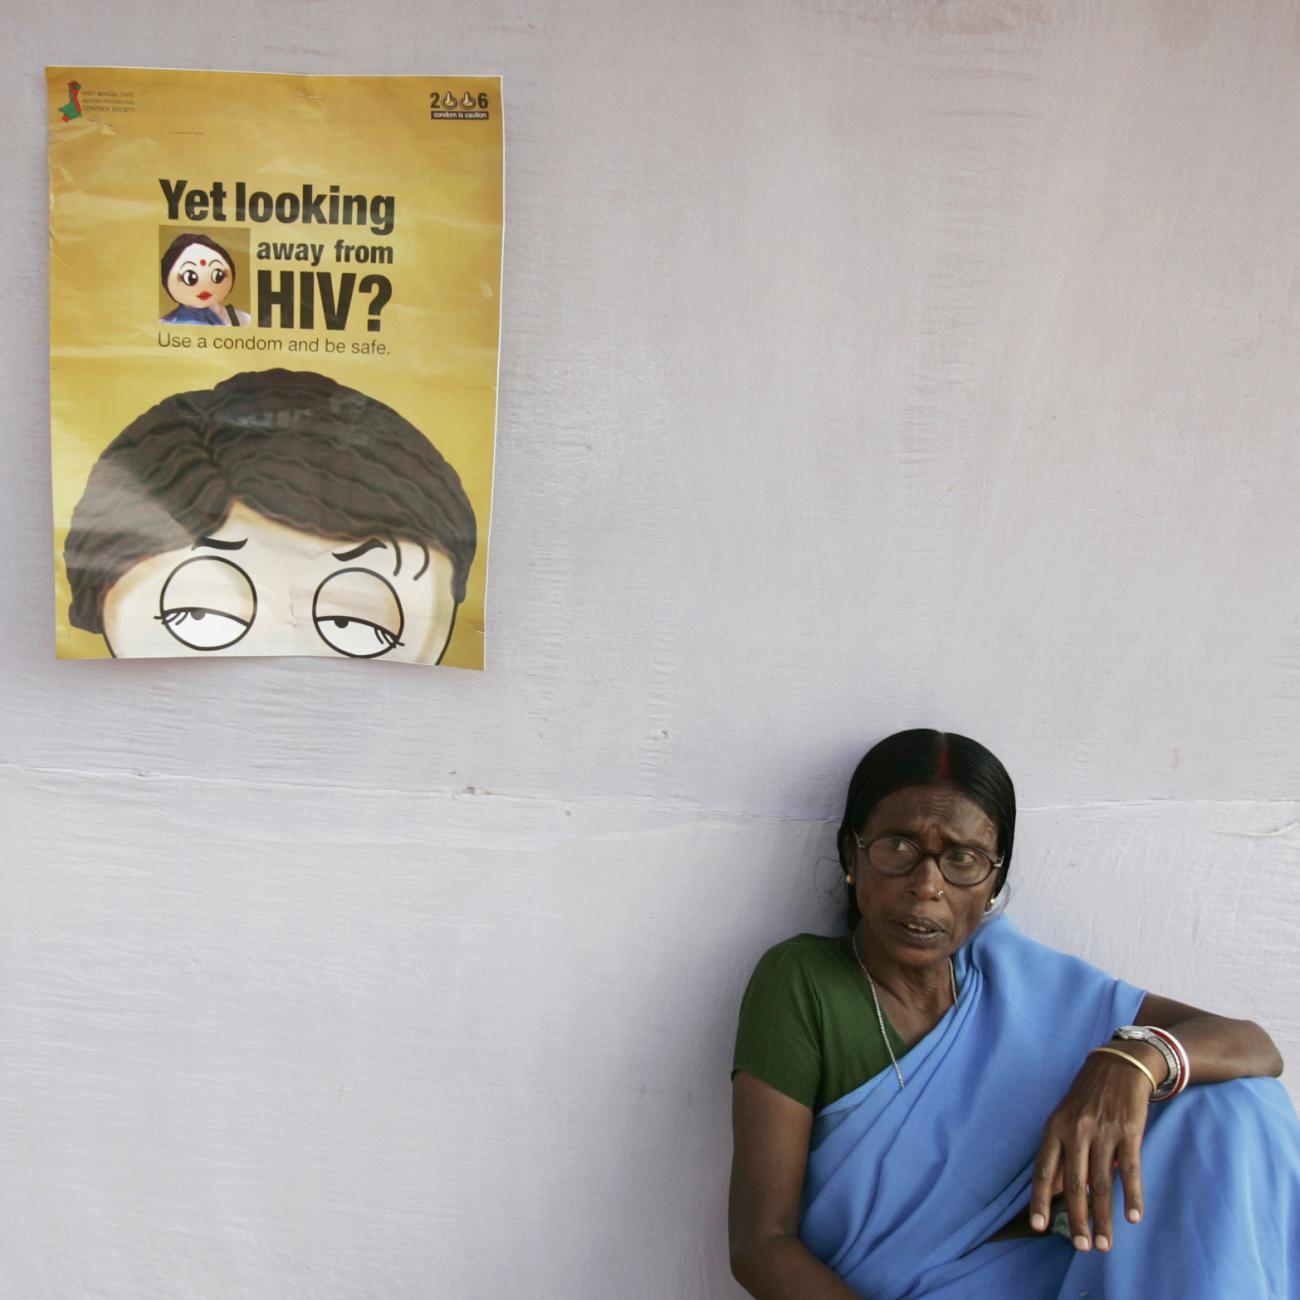 A health worker sits outside a makeshift camp for blood tests on the outskirts of Kolkata, India, on November 30, 2006